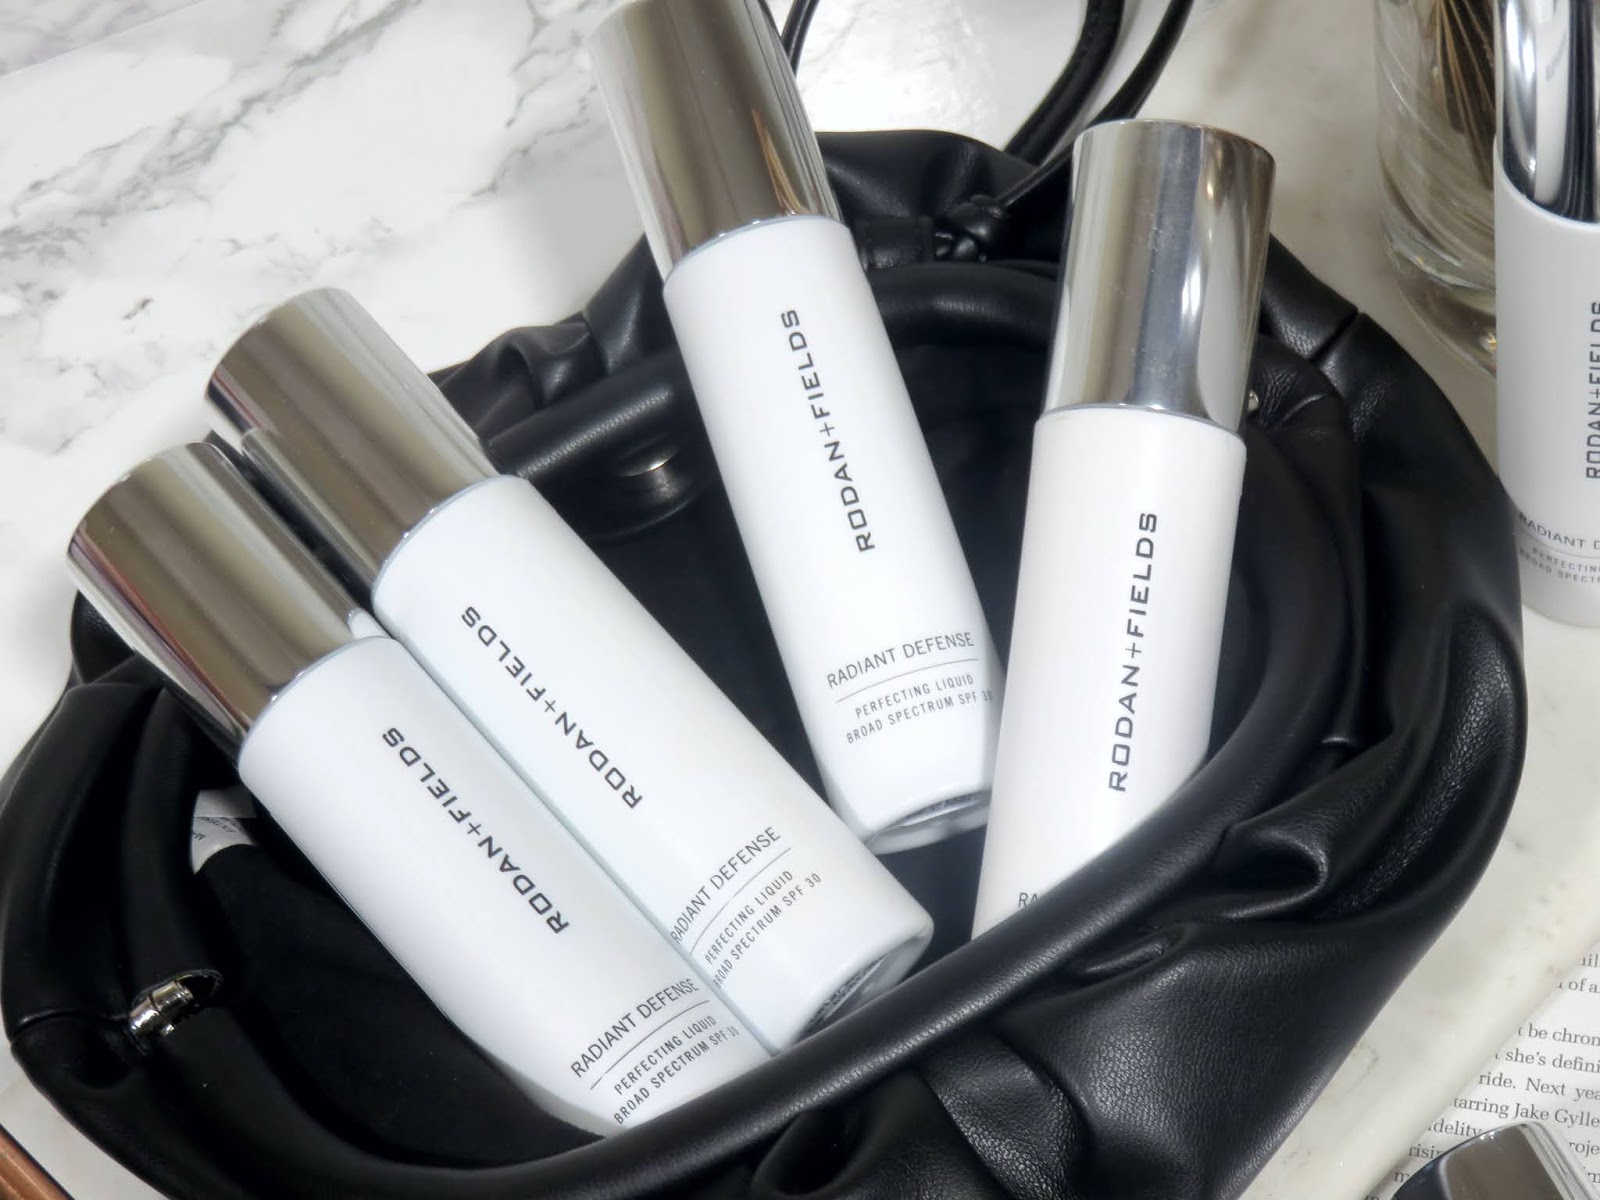 Rodan + Fields Radiant Defense Perfecting Liquid SPF 30 Review and Swatches